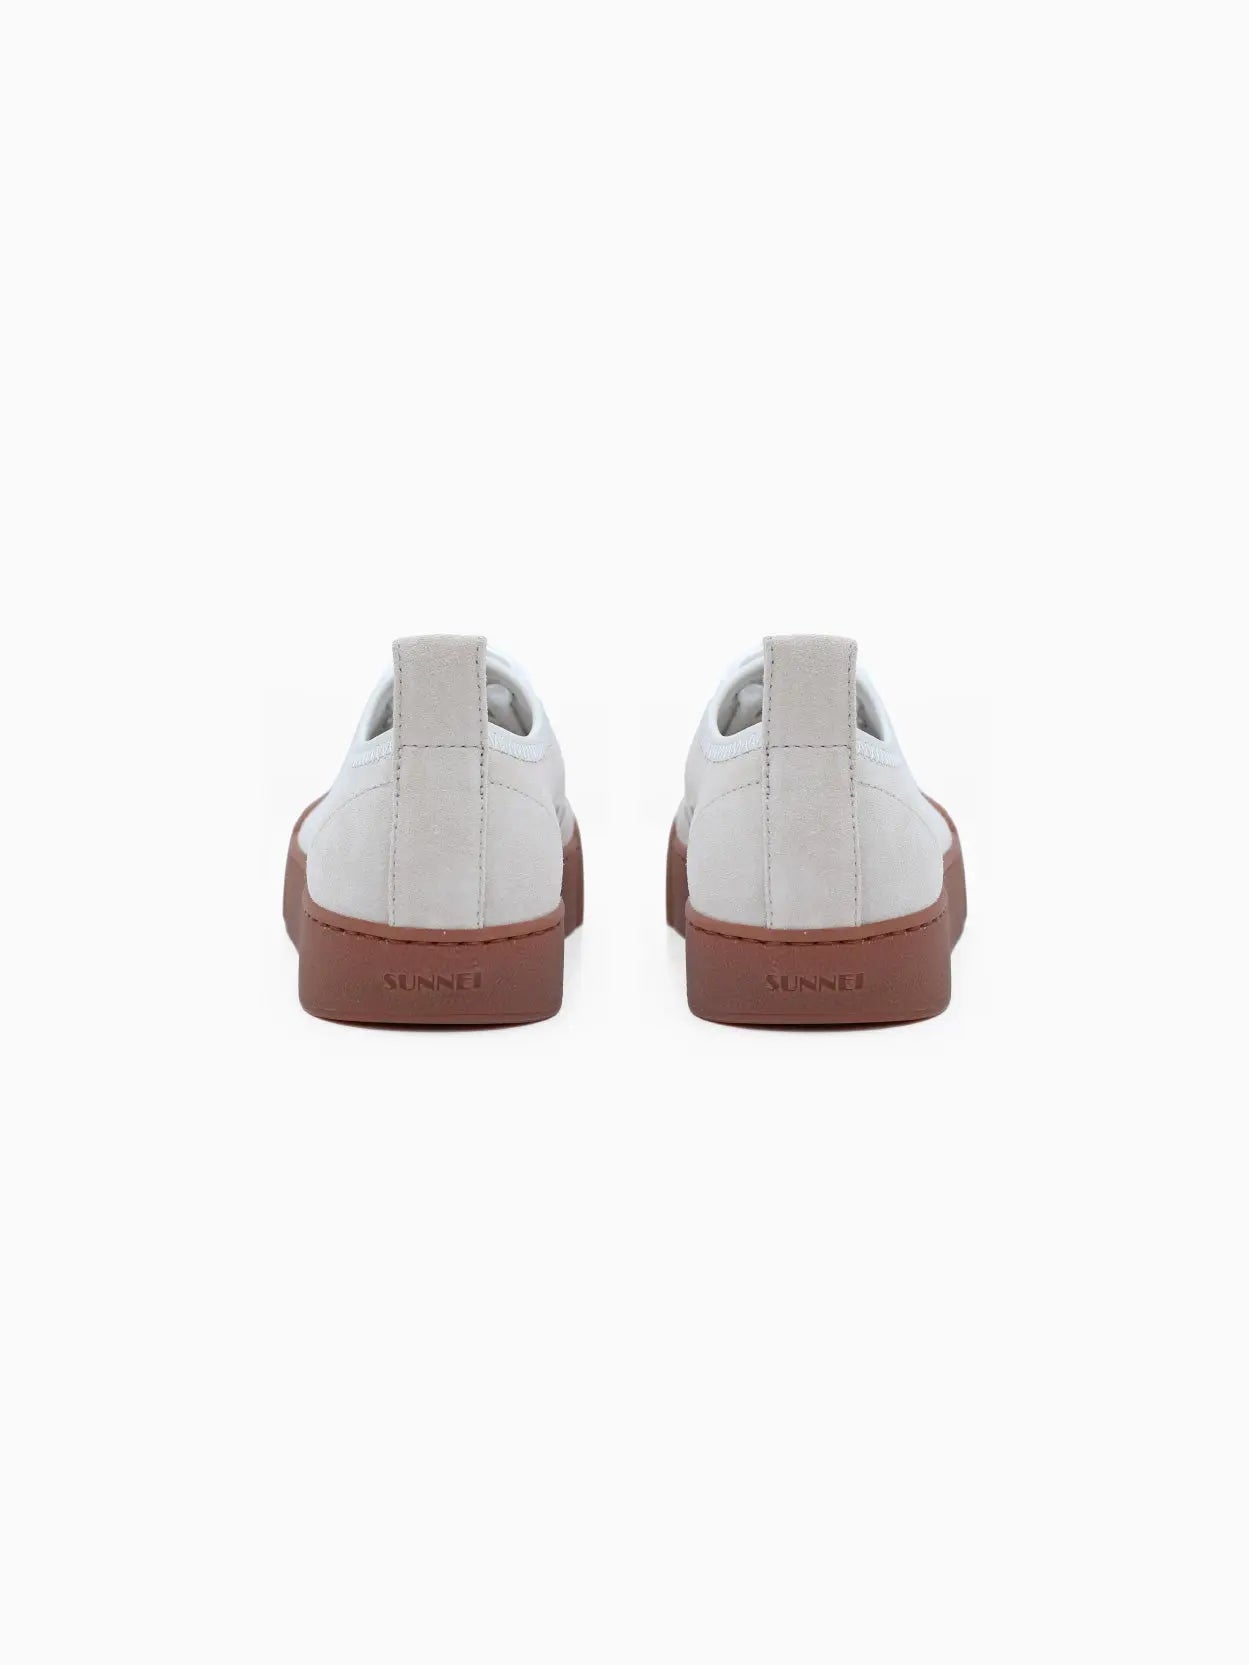 A side view of a single low-top sneaker with a beige upper, white laces, and a brown rubber sole that extends to cover the toe. The minimalist design includes a pull tab on the back for easy wear. Discover this chic **Sunnei Isi Low Off White** footwear at our Barcelona store or online at Bassalstore. The background is white.